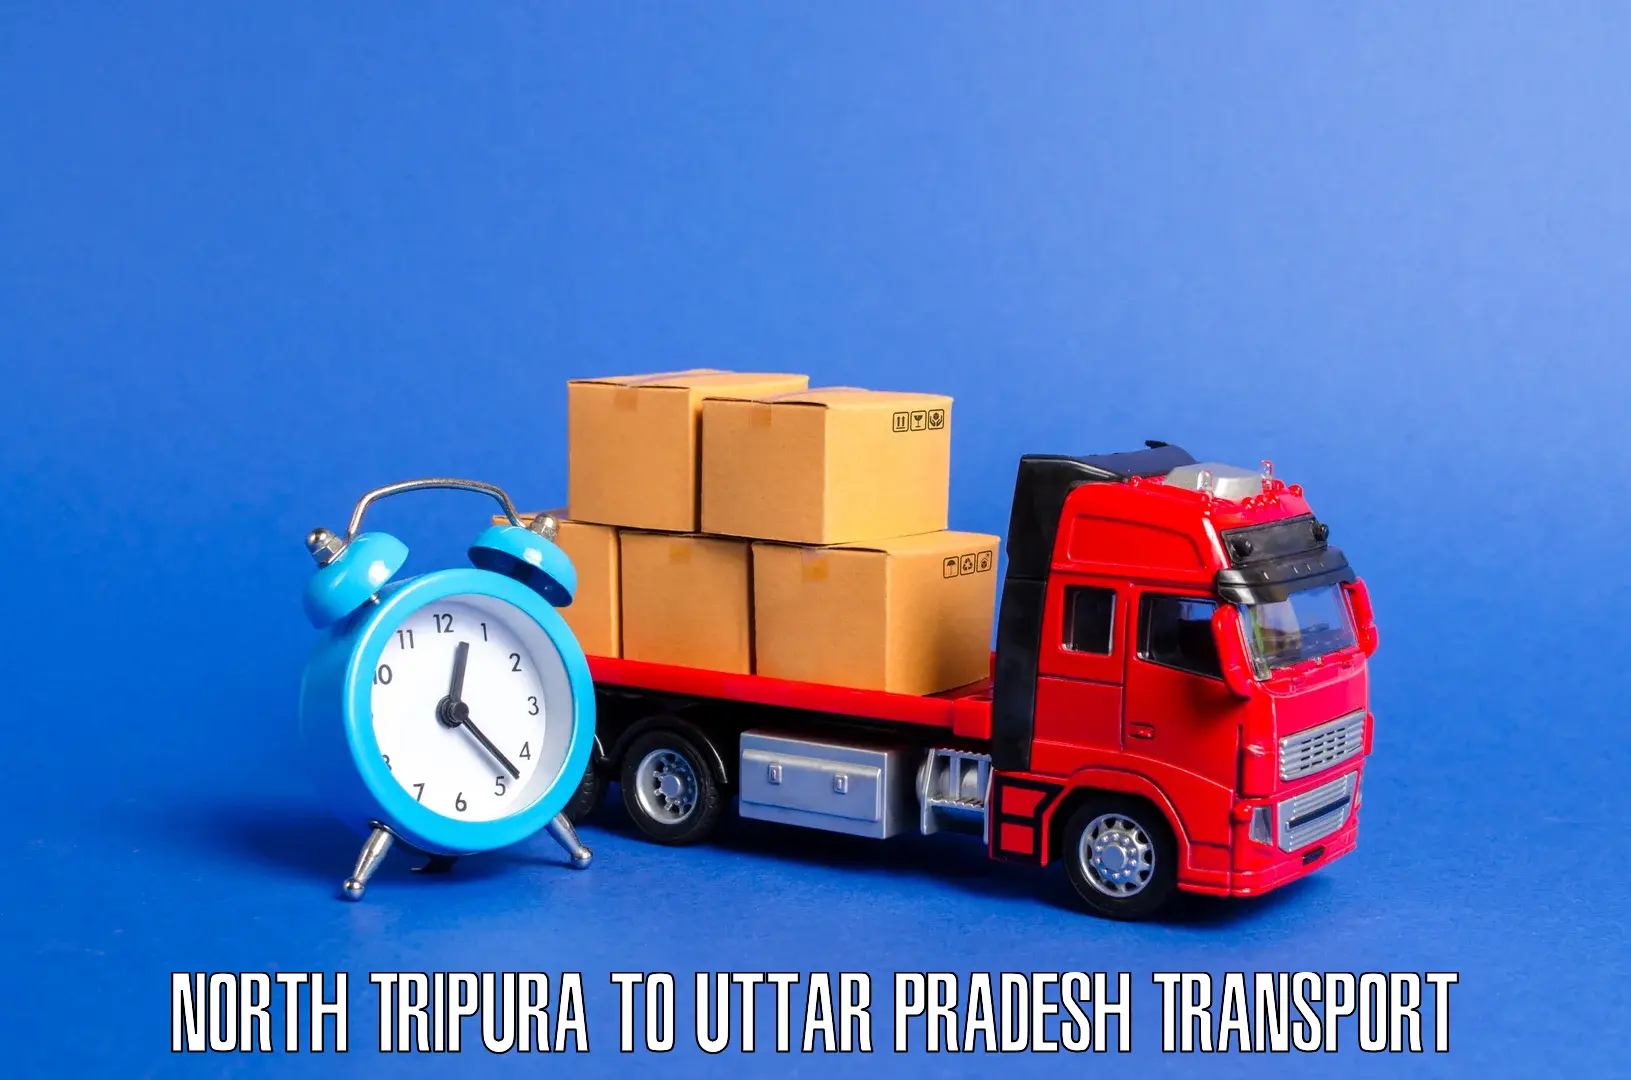 Land transport services in North Tripura to Shikohabad